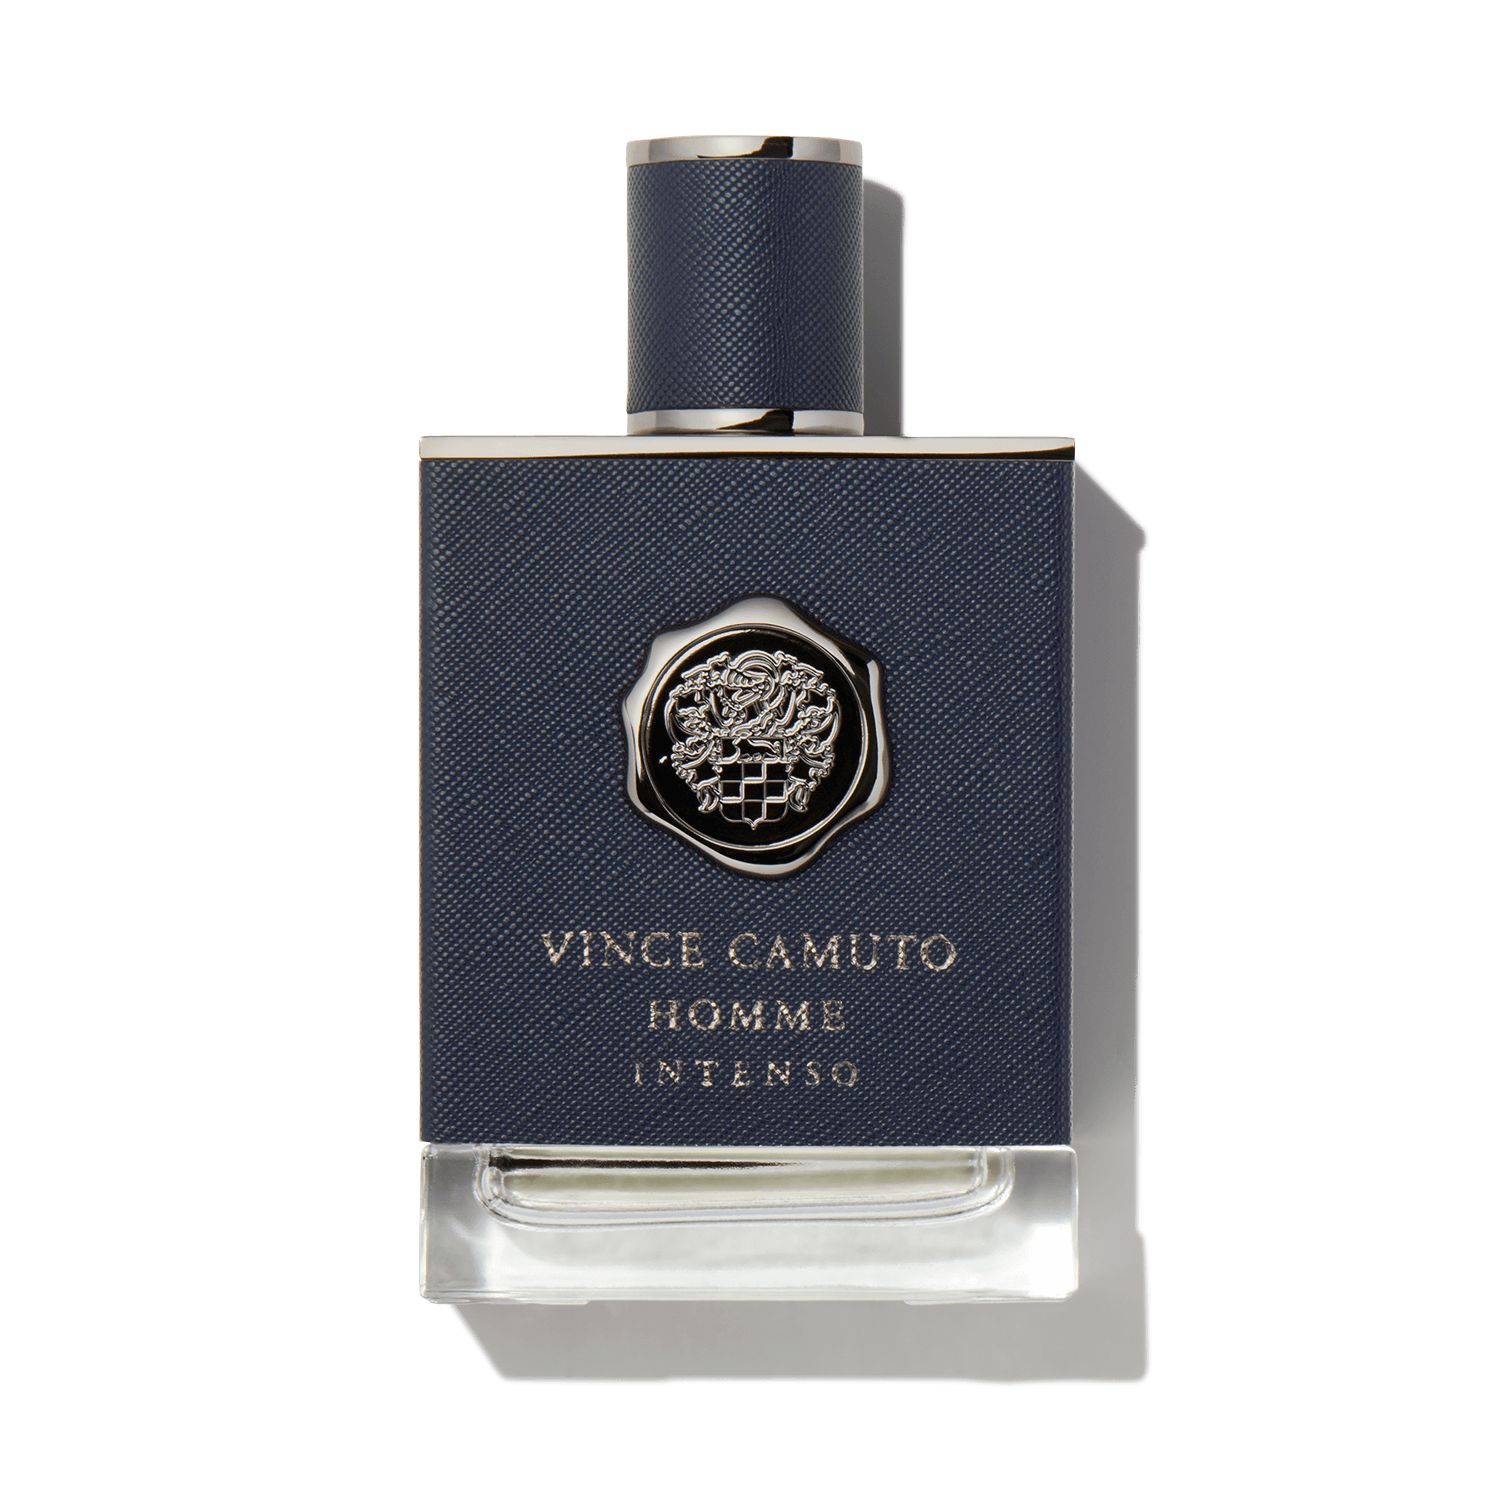  Vince Camuto